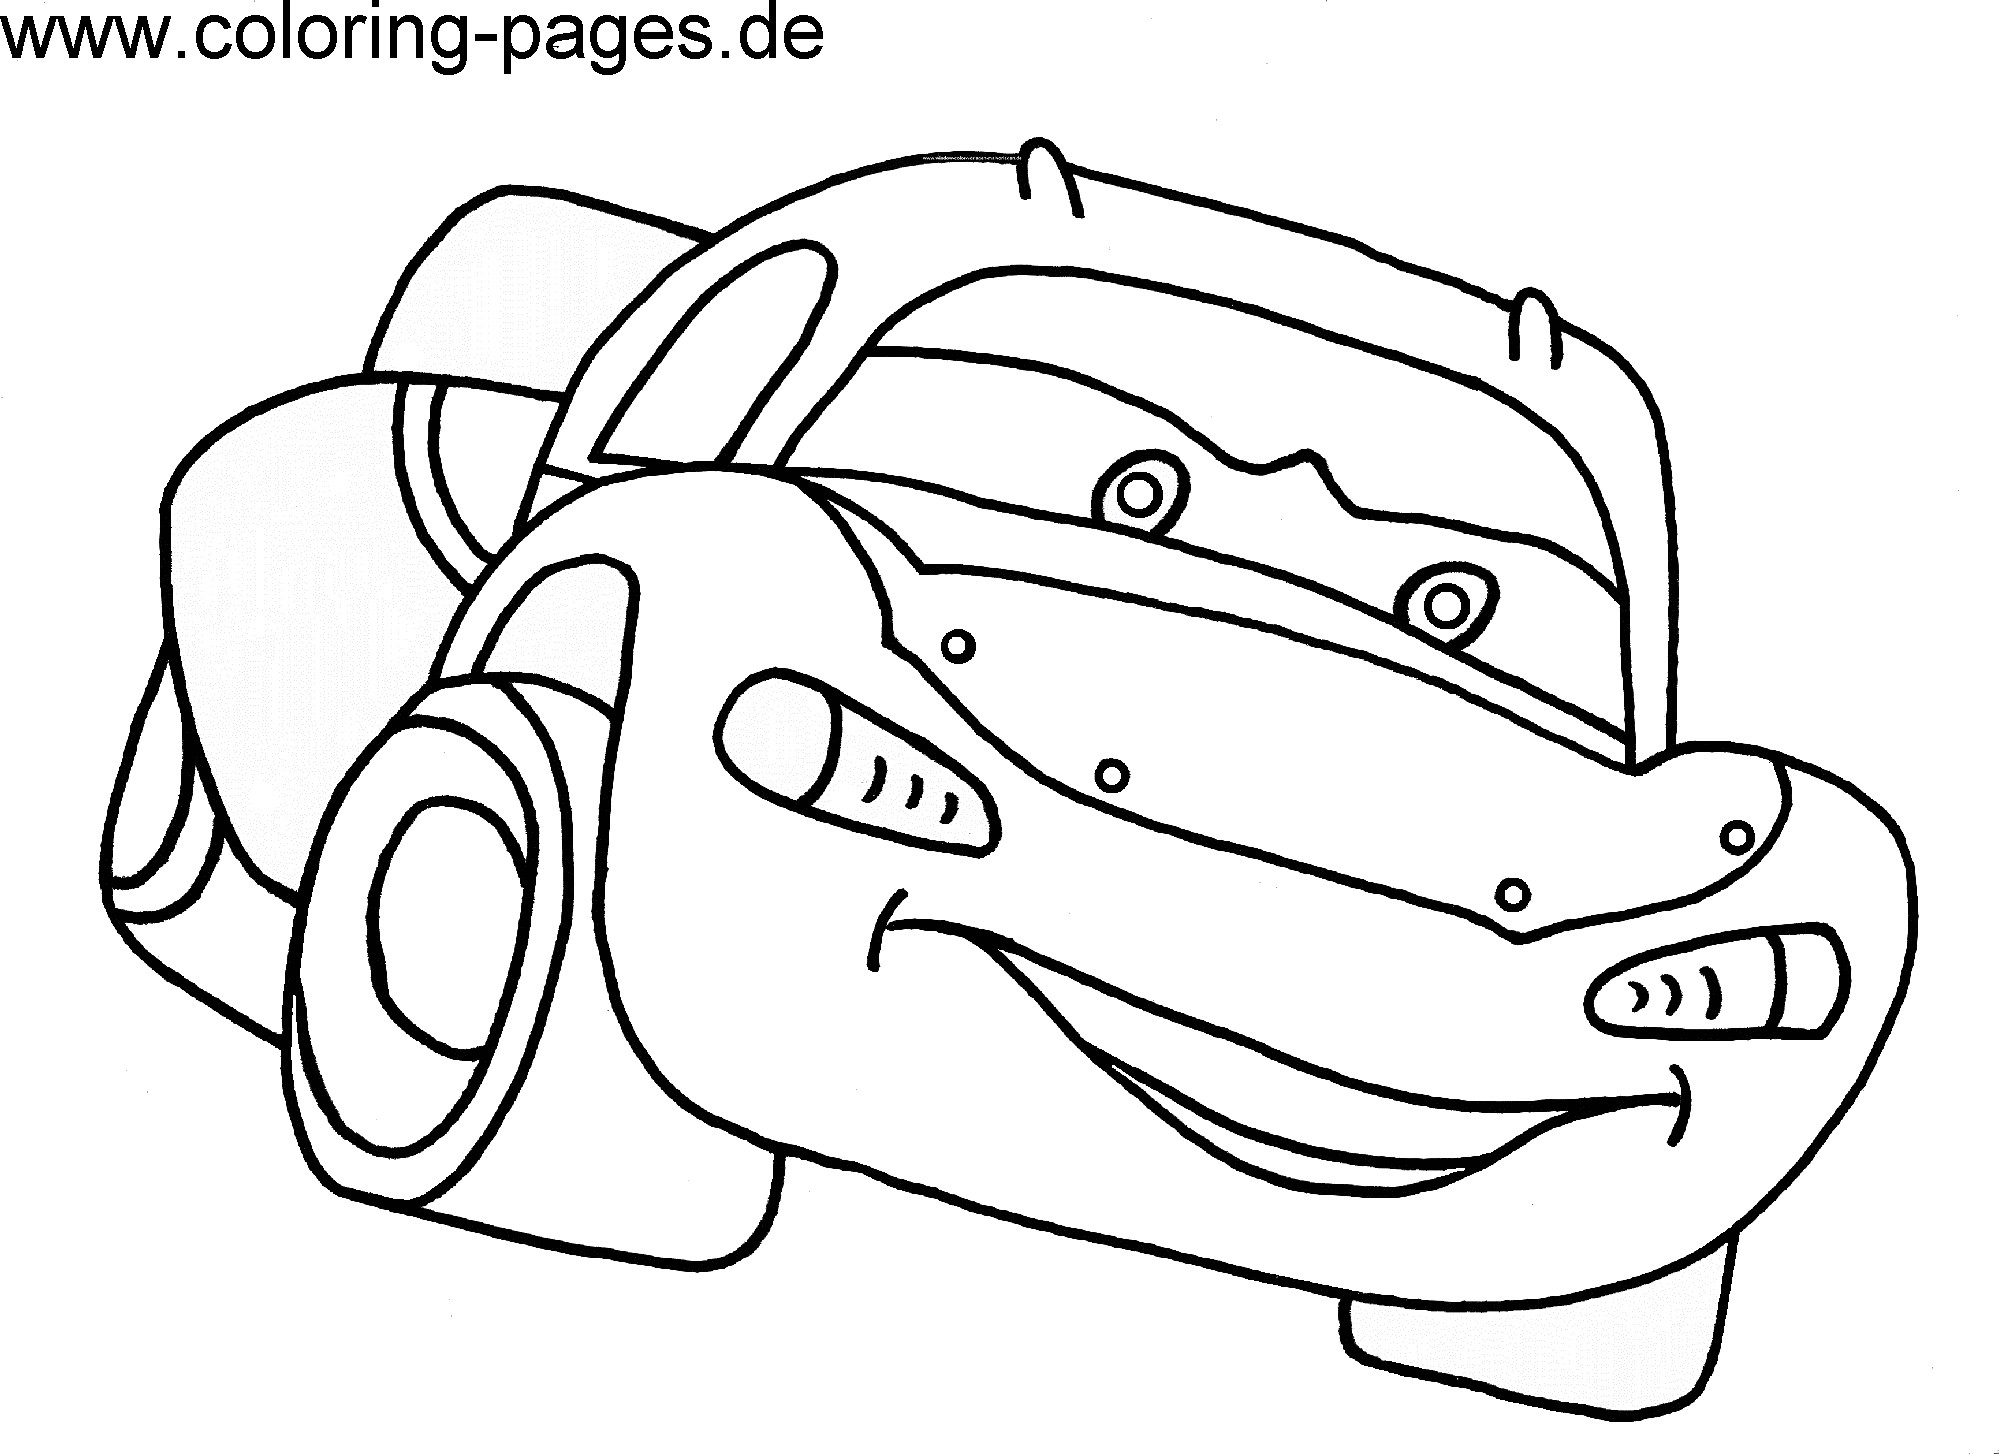 Coloring Pages Kidsboys.Com
 coloring pages for kids